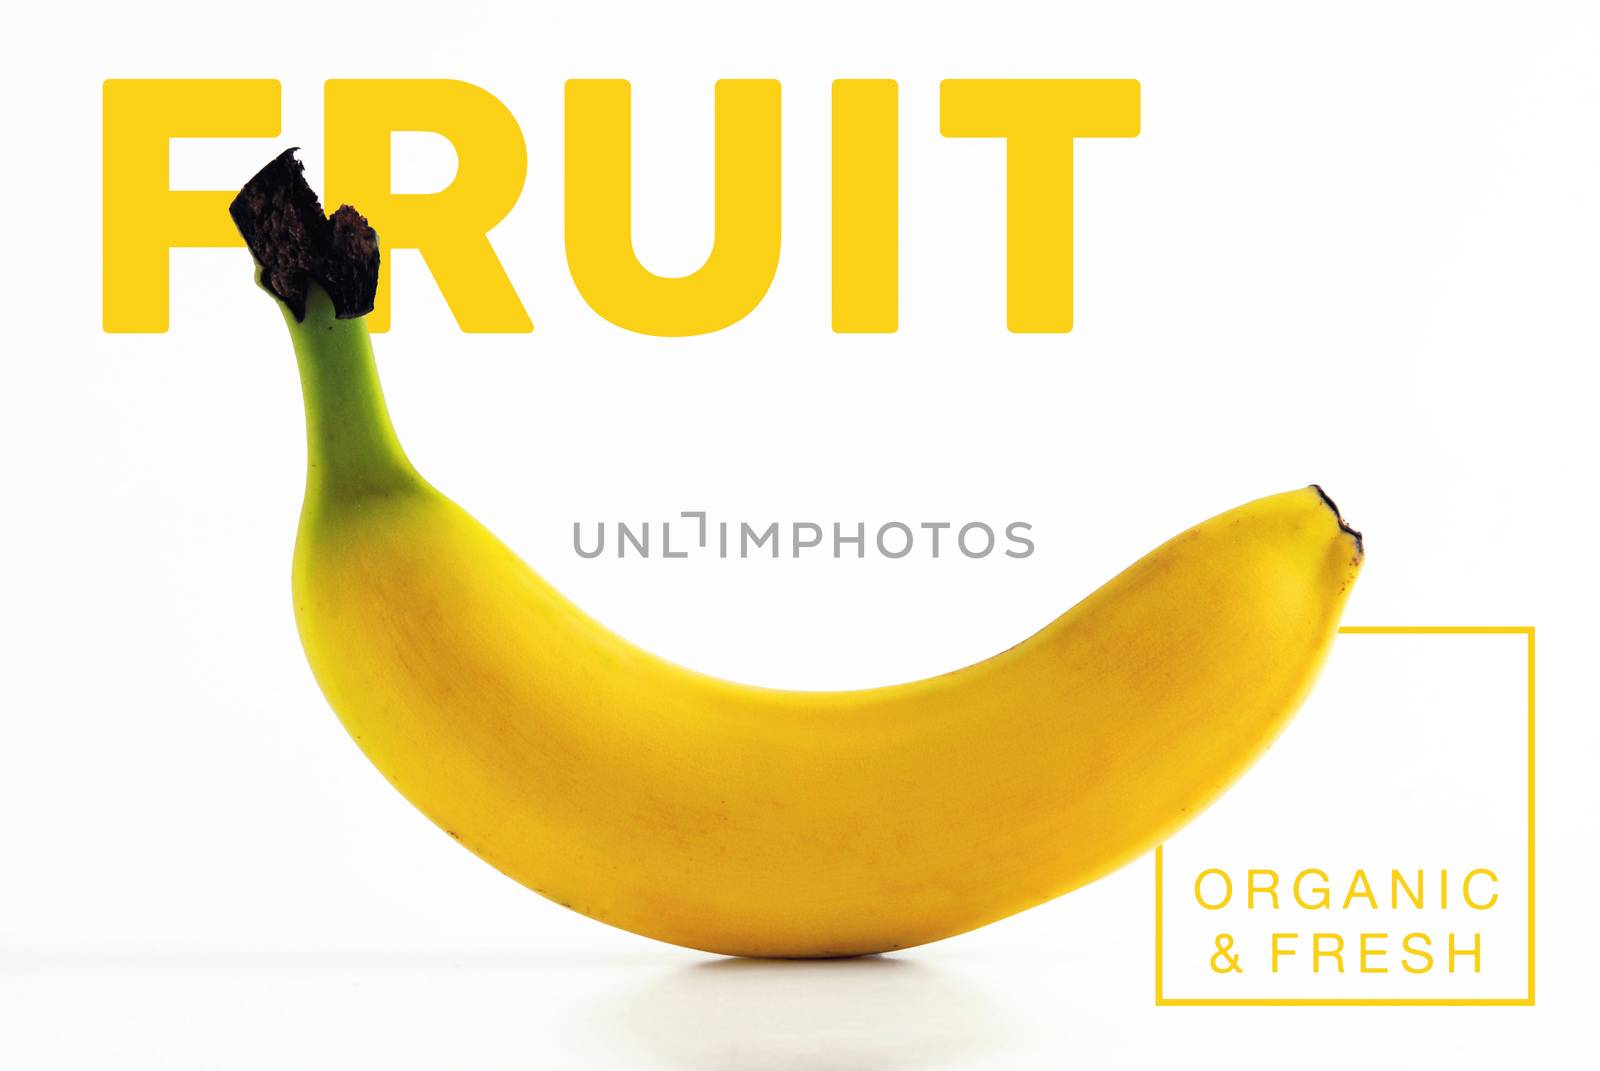 Fresh and organic banana fruit isolated background ideal for healthy food concept poster or cover design.